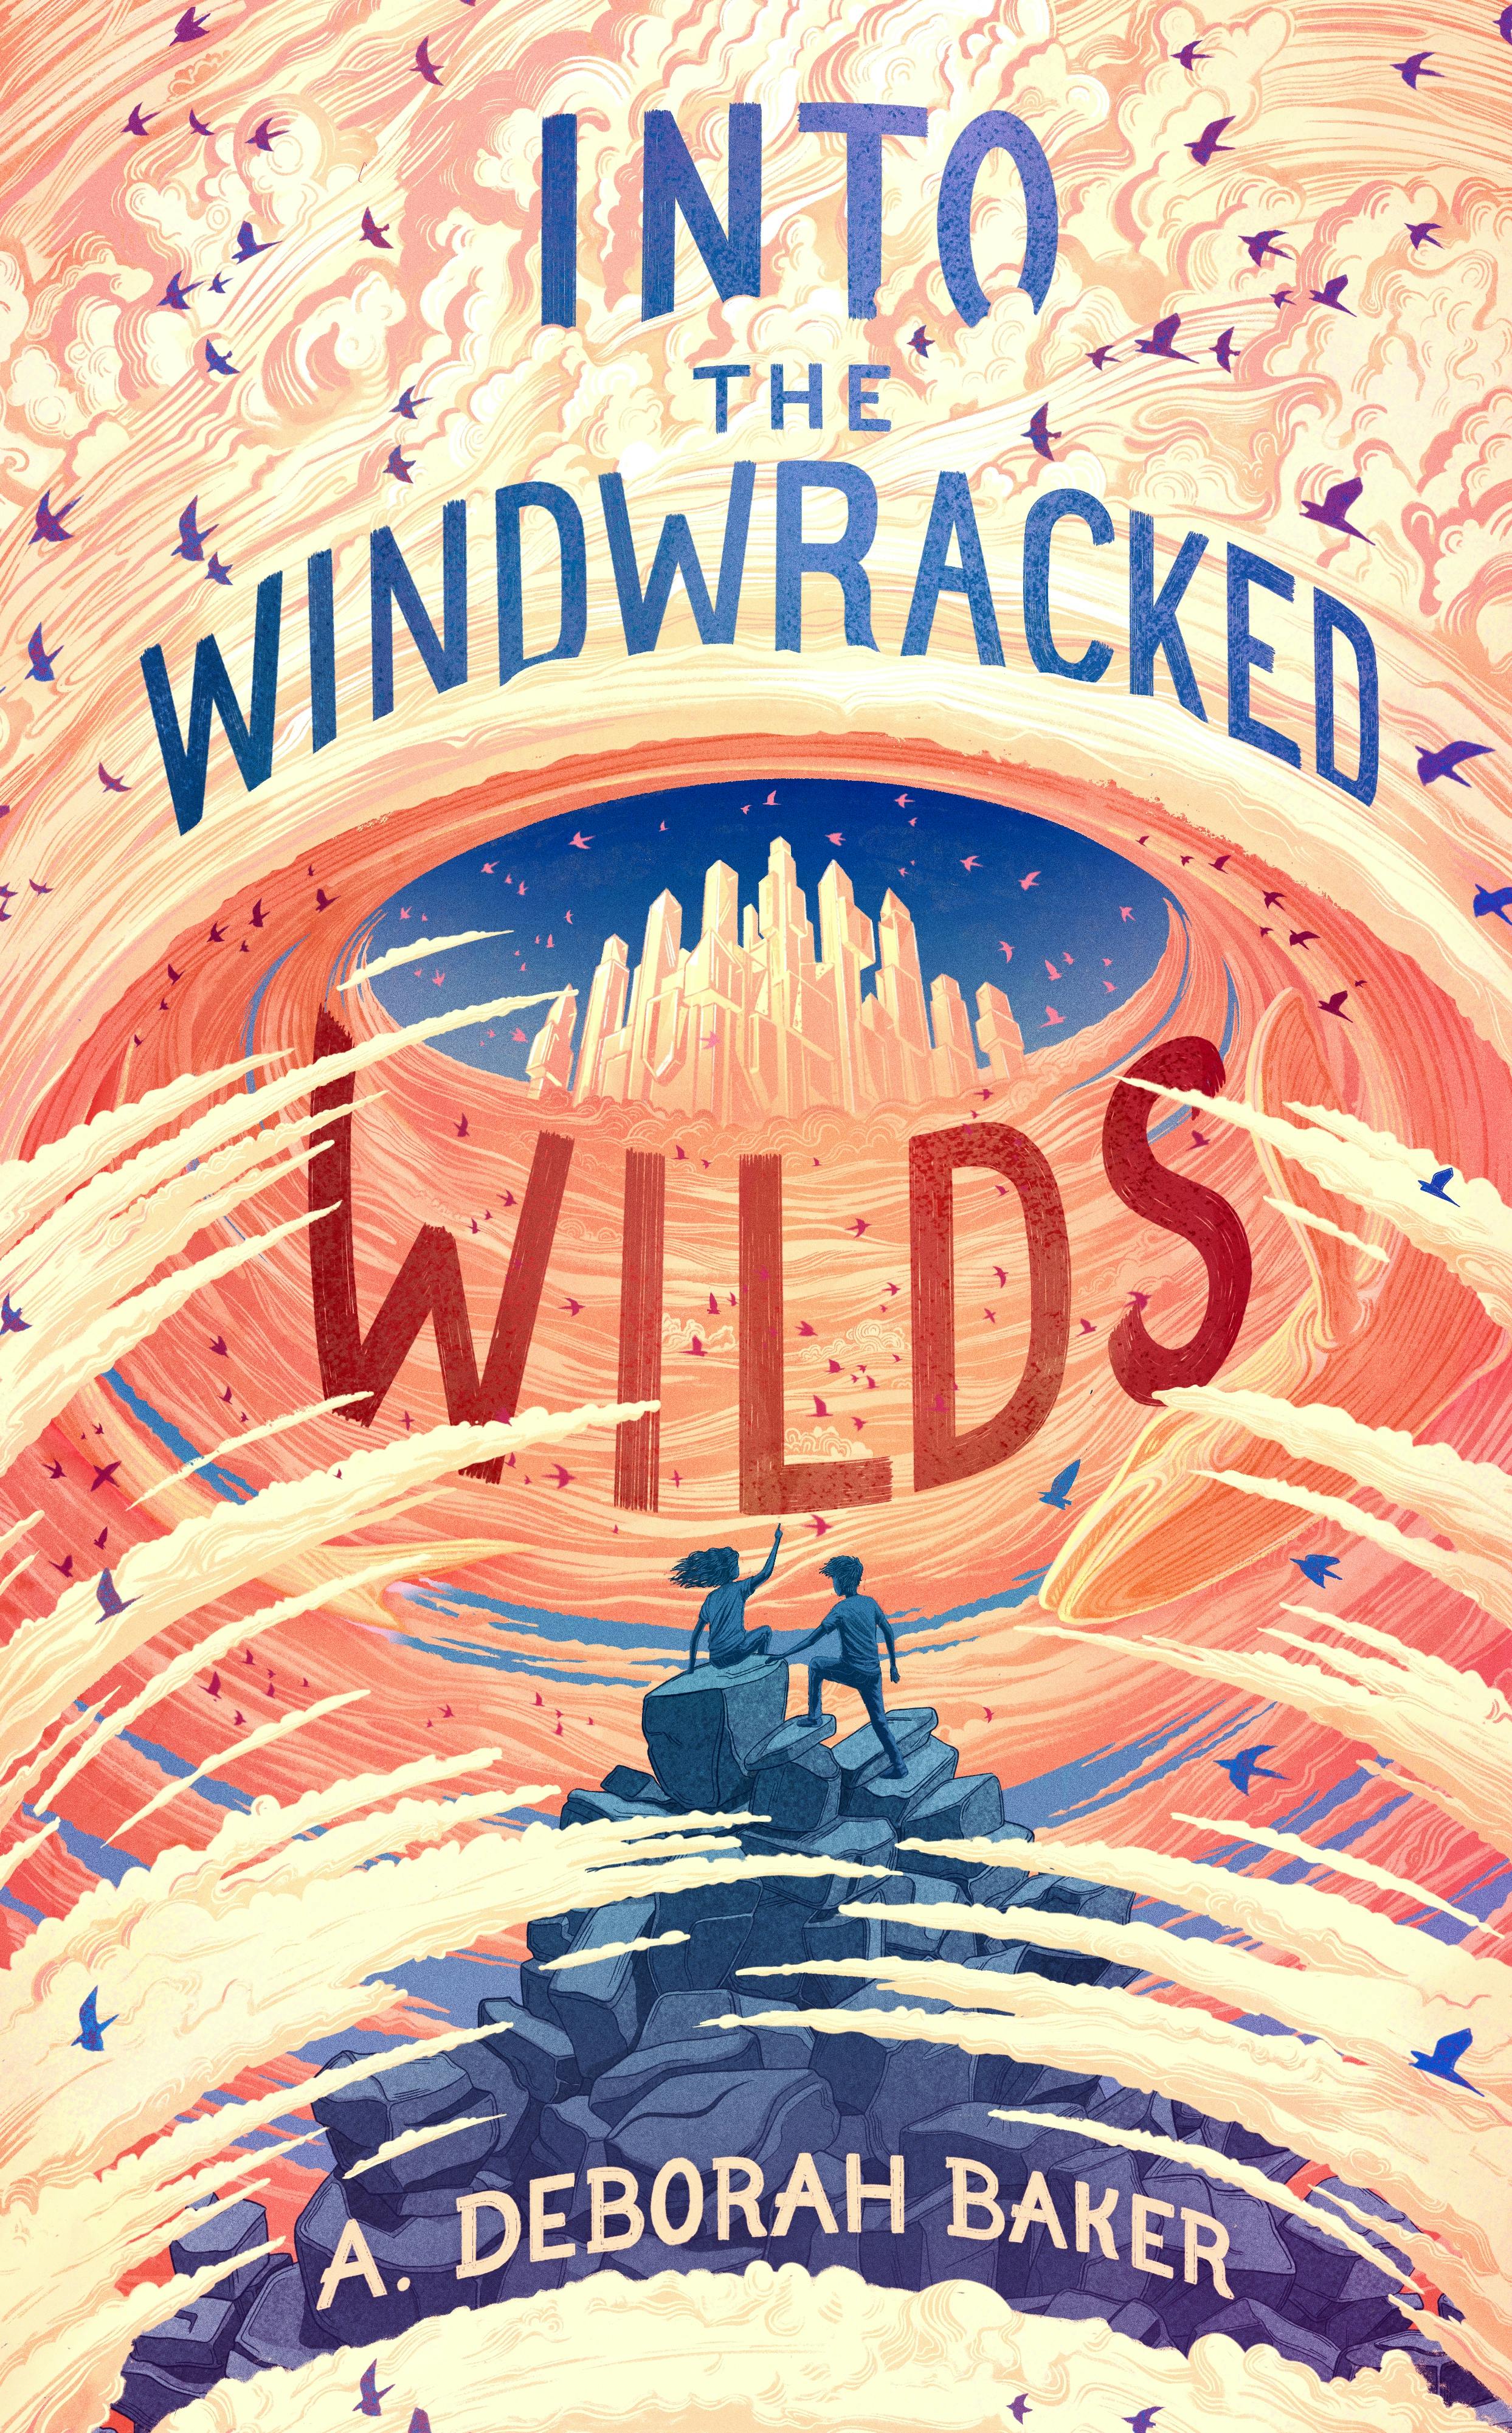 Cover for the book titled as: Into the Windwracked Wilds